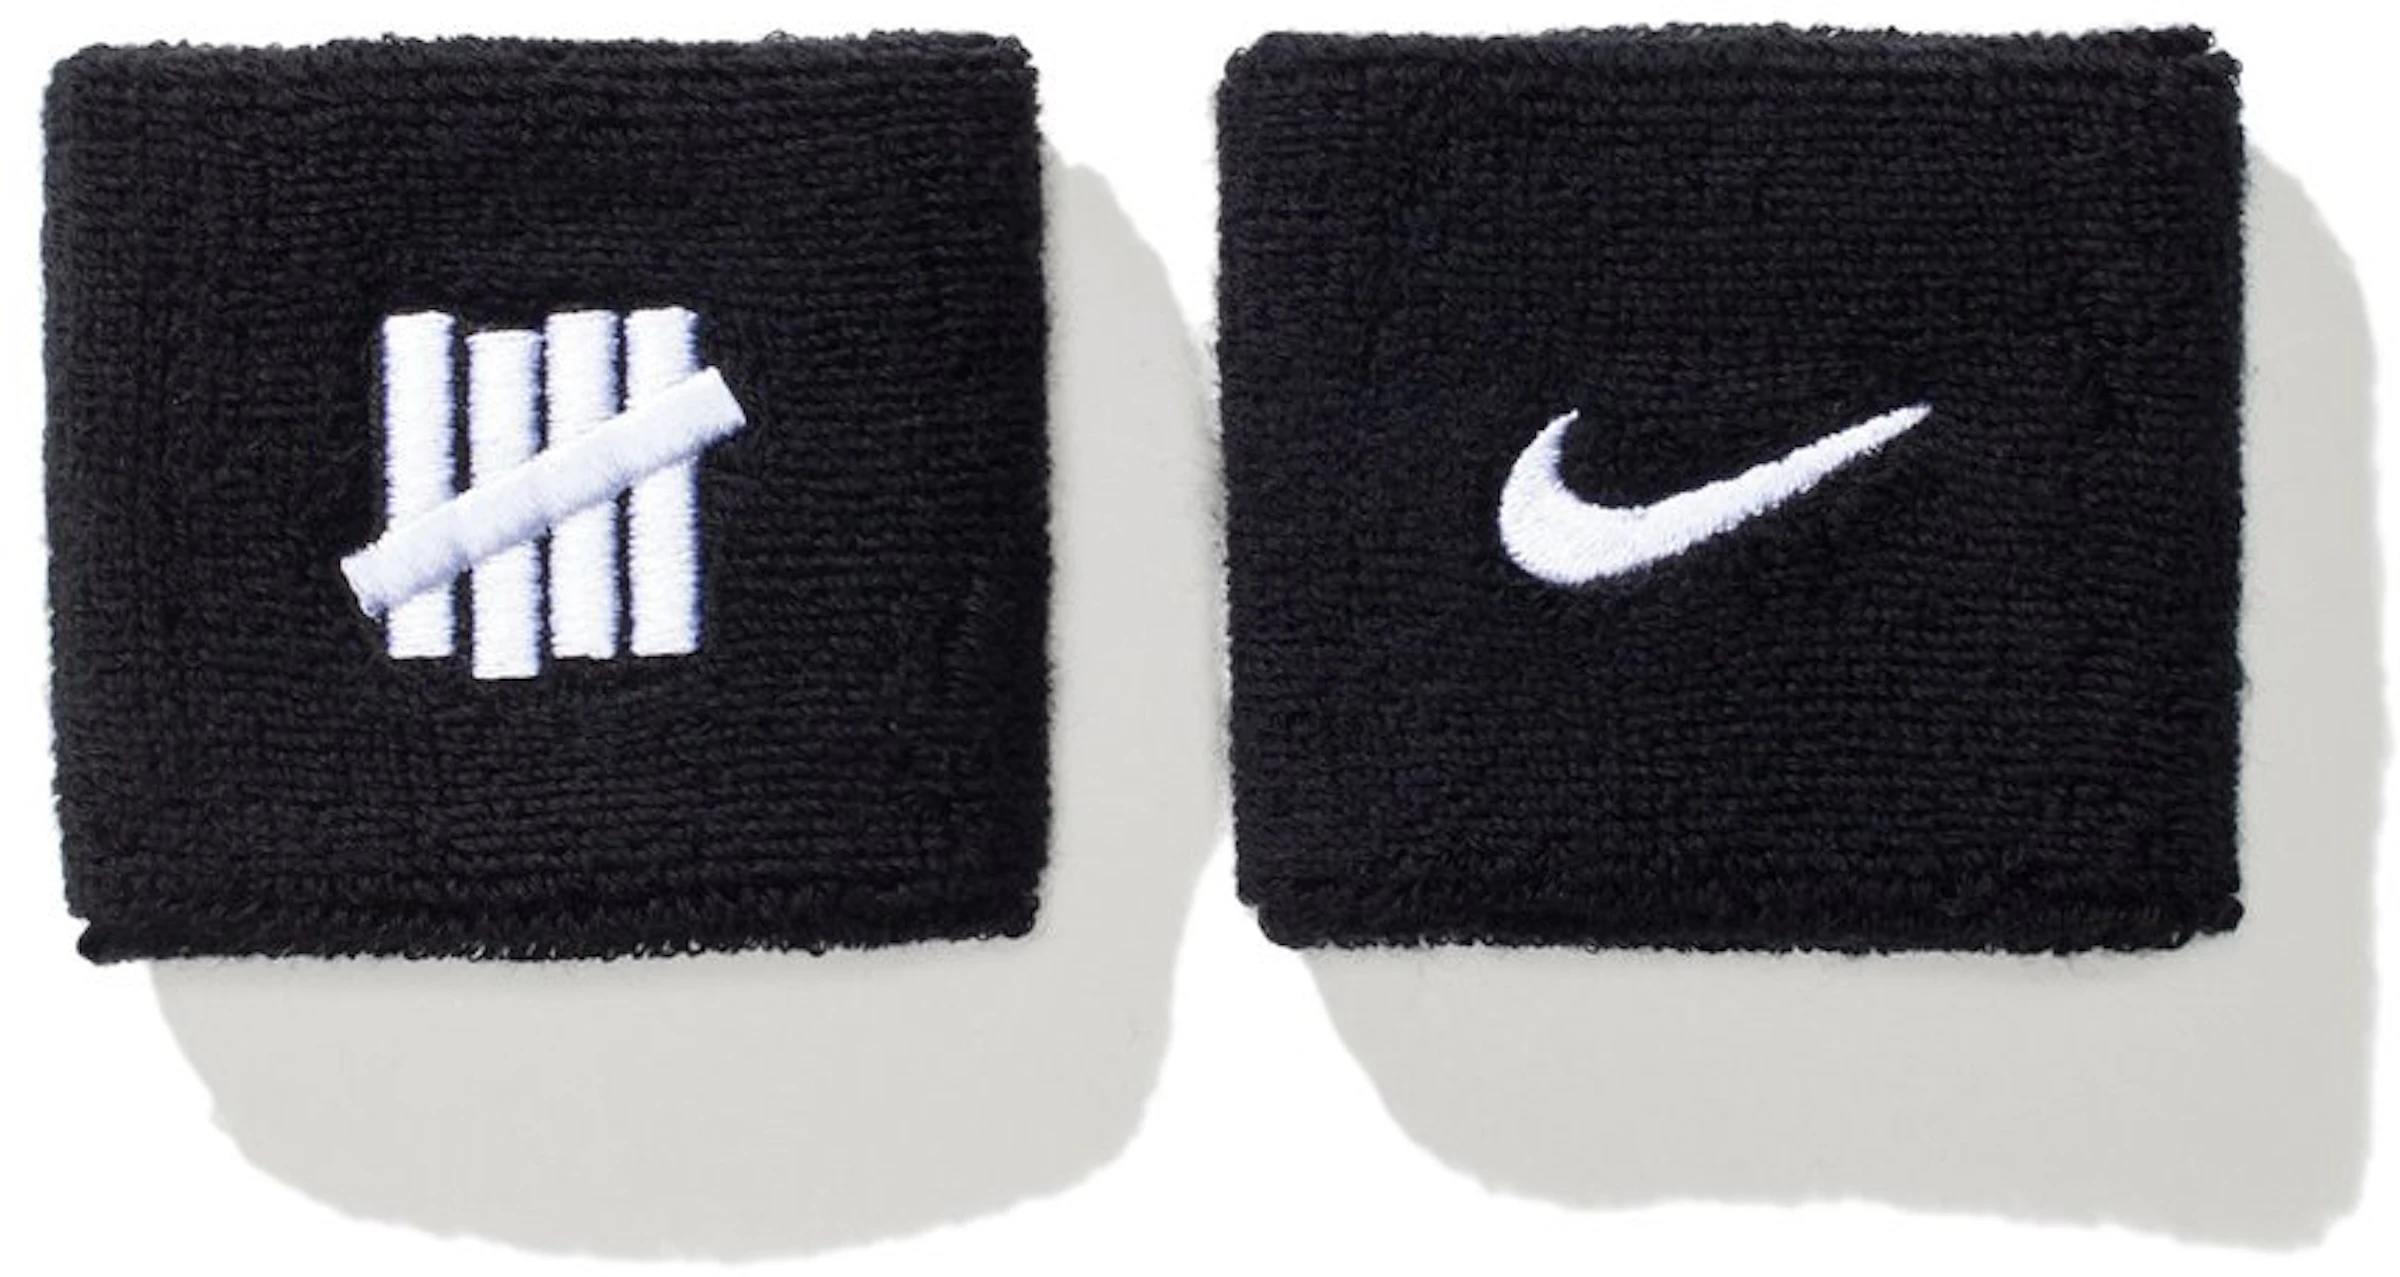 Se infla Almacén lector Undefeated x Nike Wristband Black - SS18 - ES